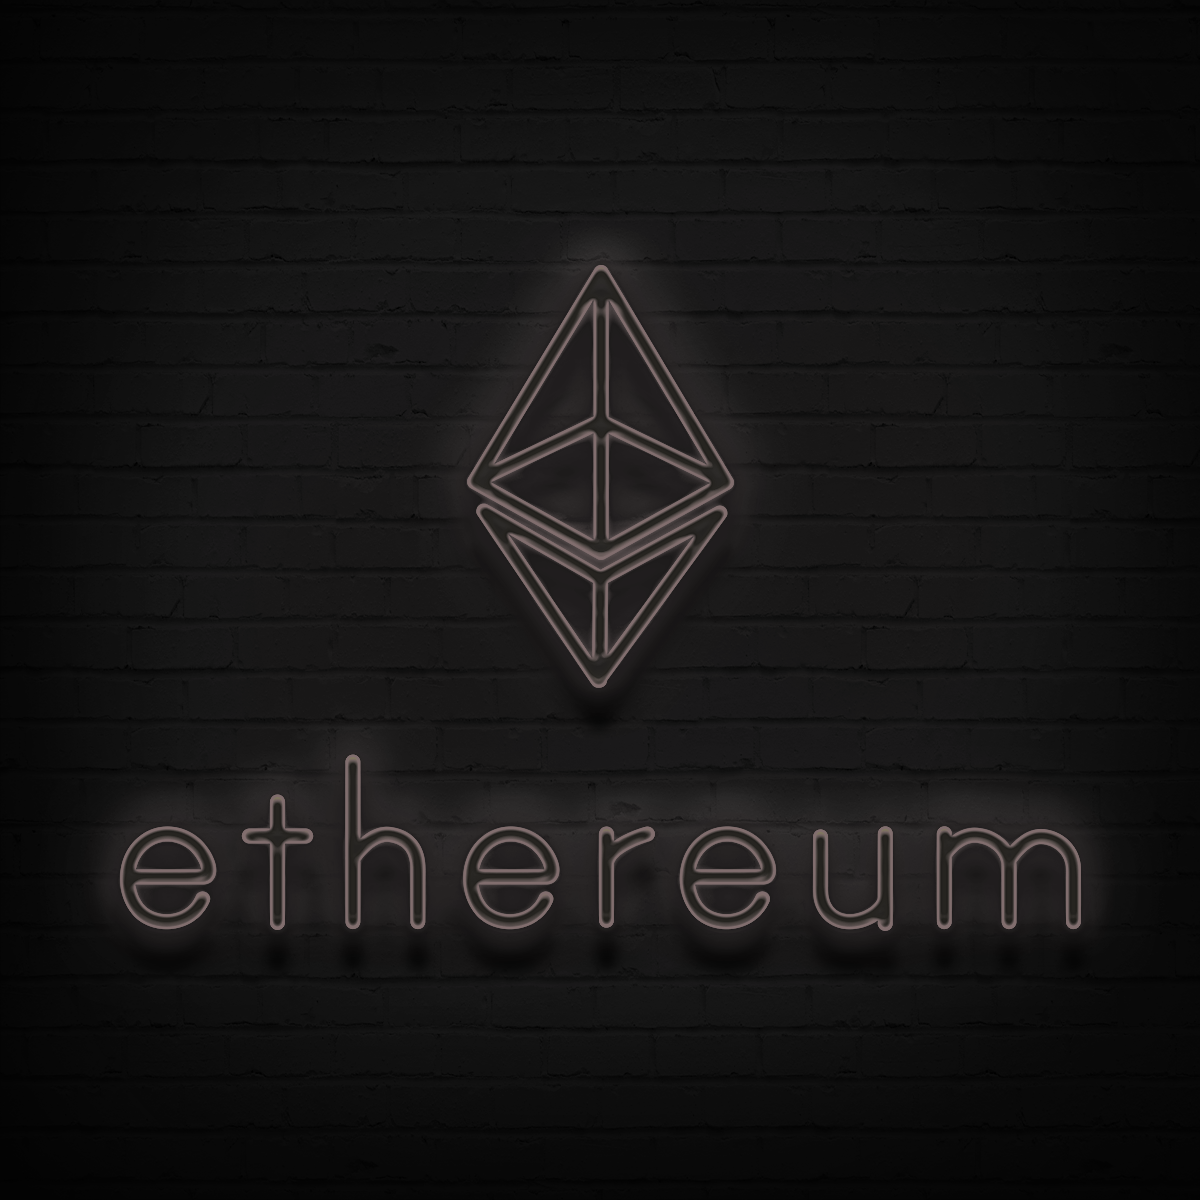 'Ethereum' LED Neon Sign